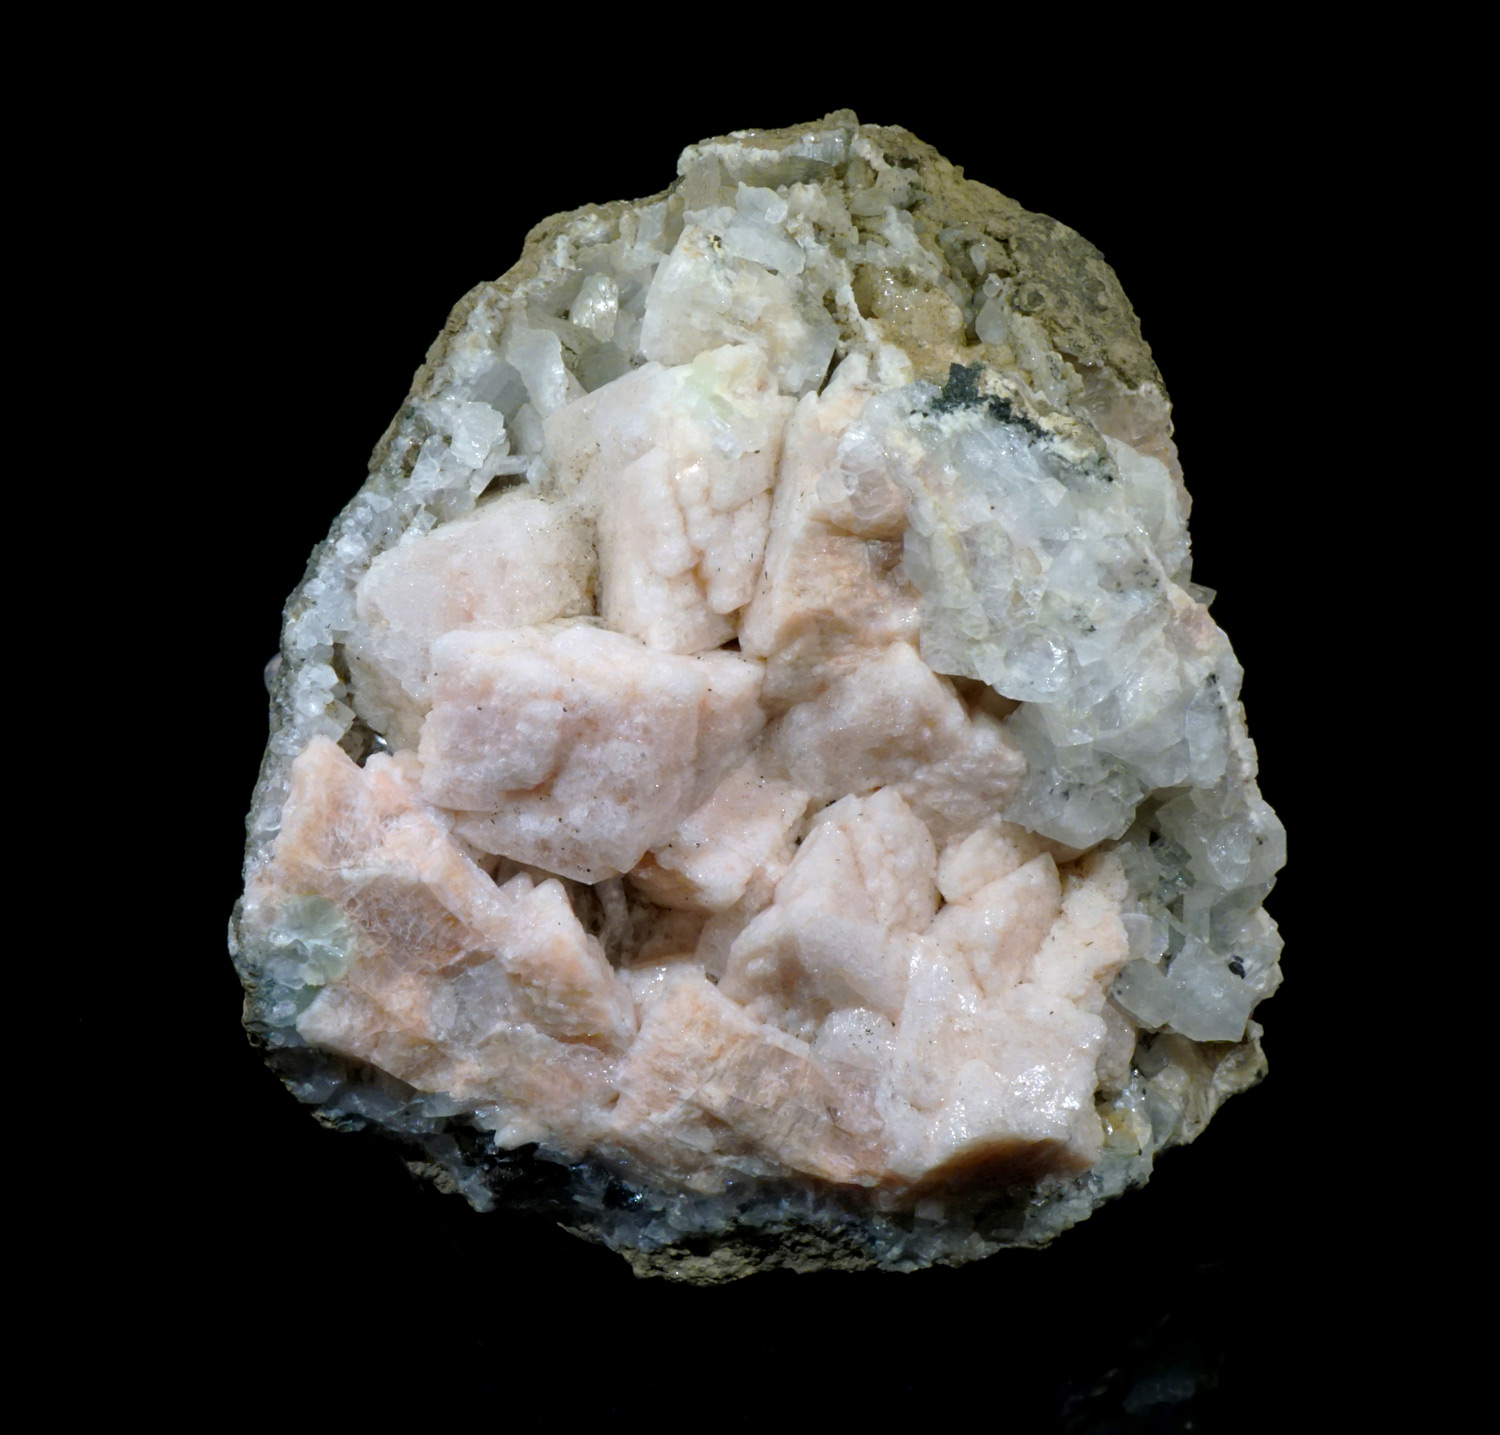 Pink Gmelinite Crystals from Prospect Park Quarry, Prospect Park, Passaic Co., New Jersey